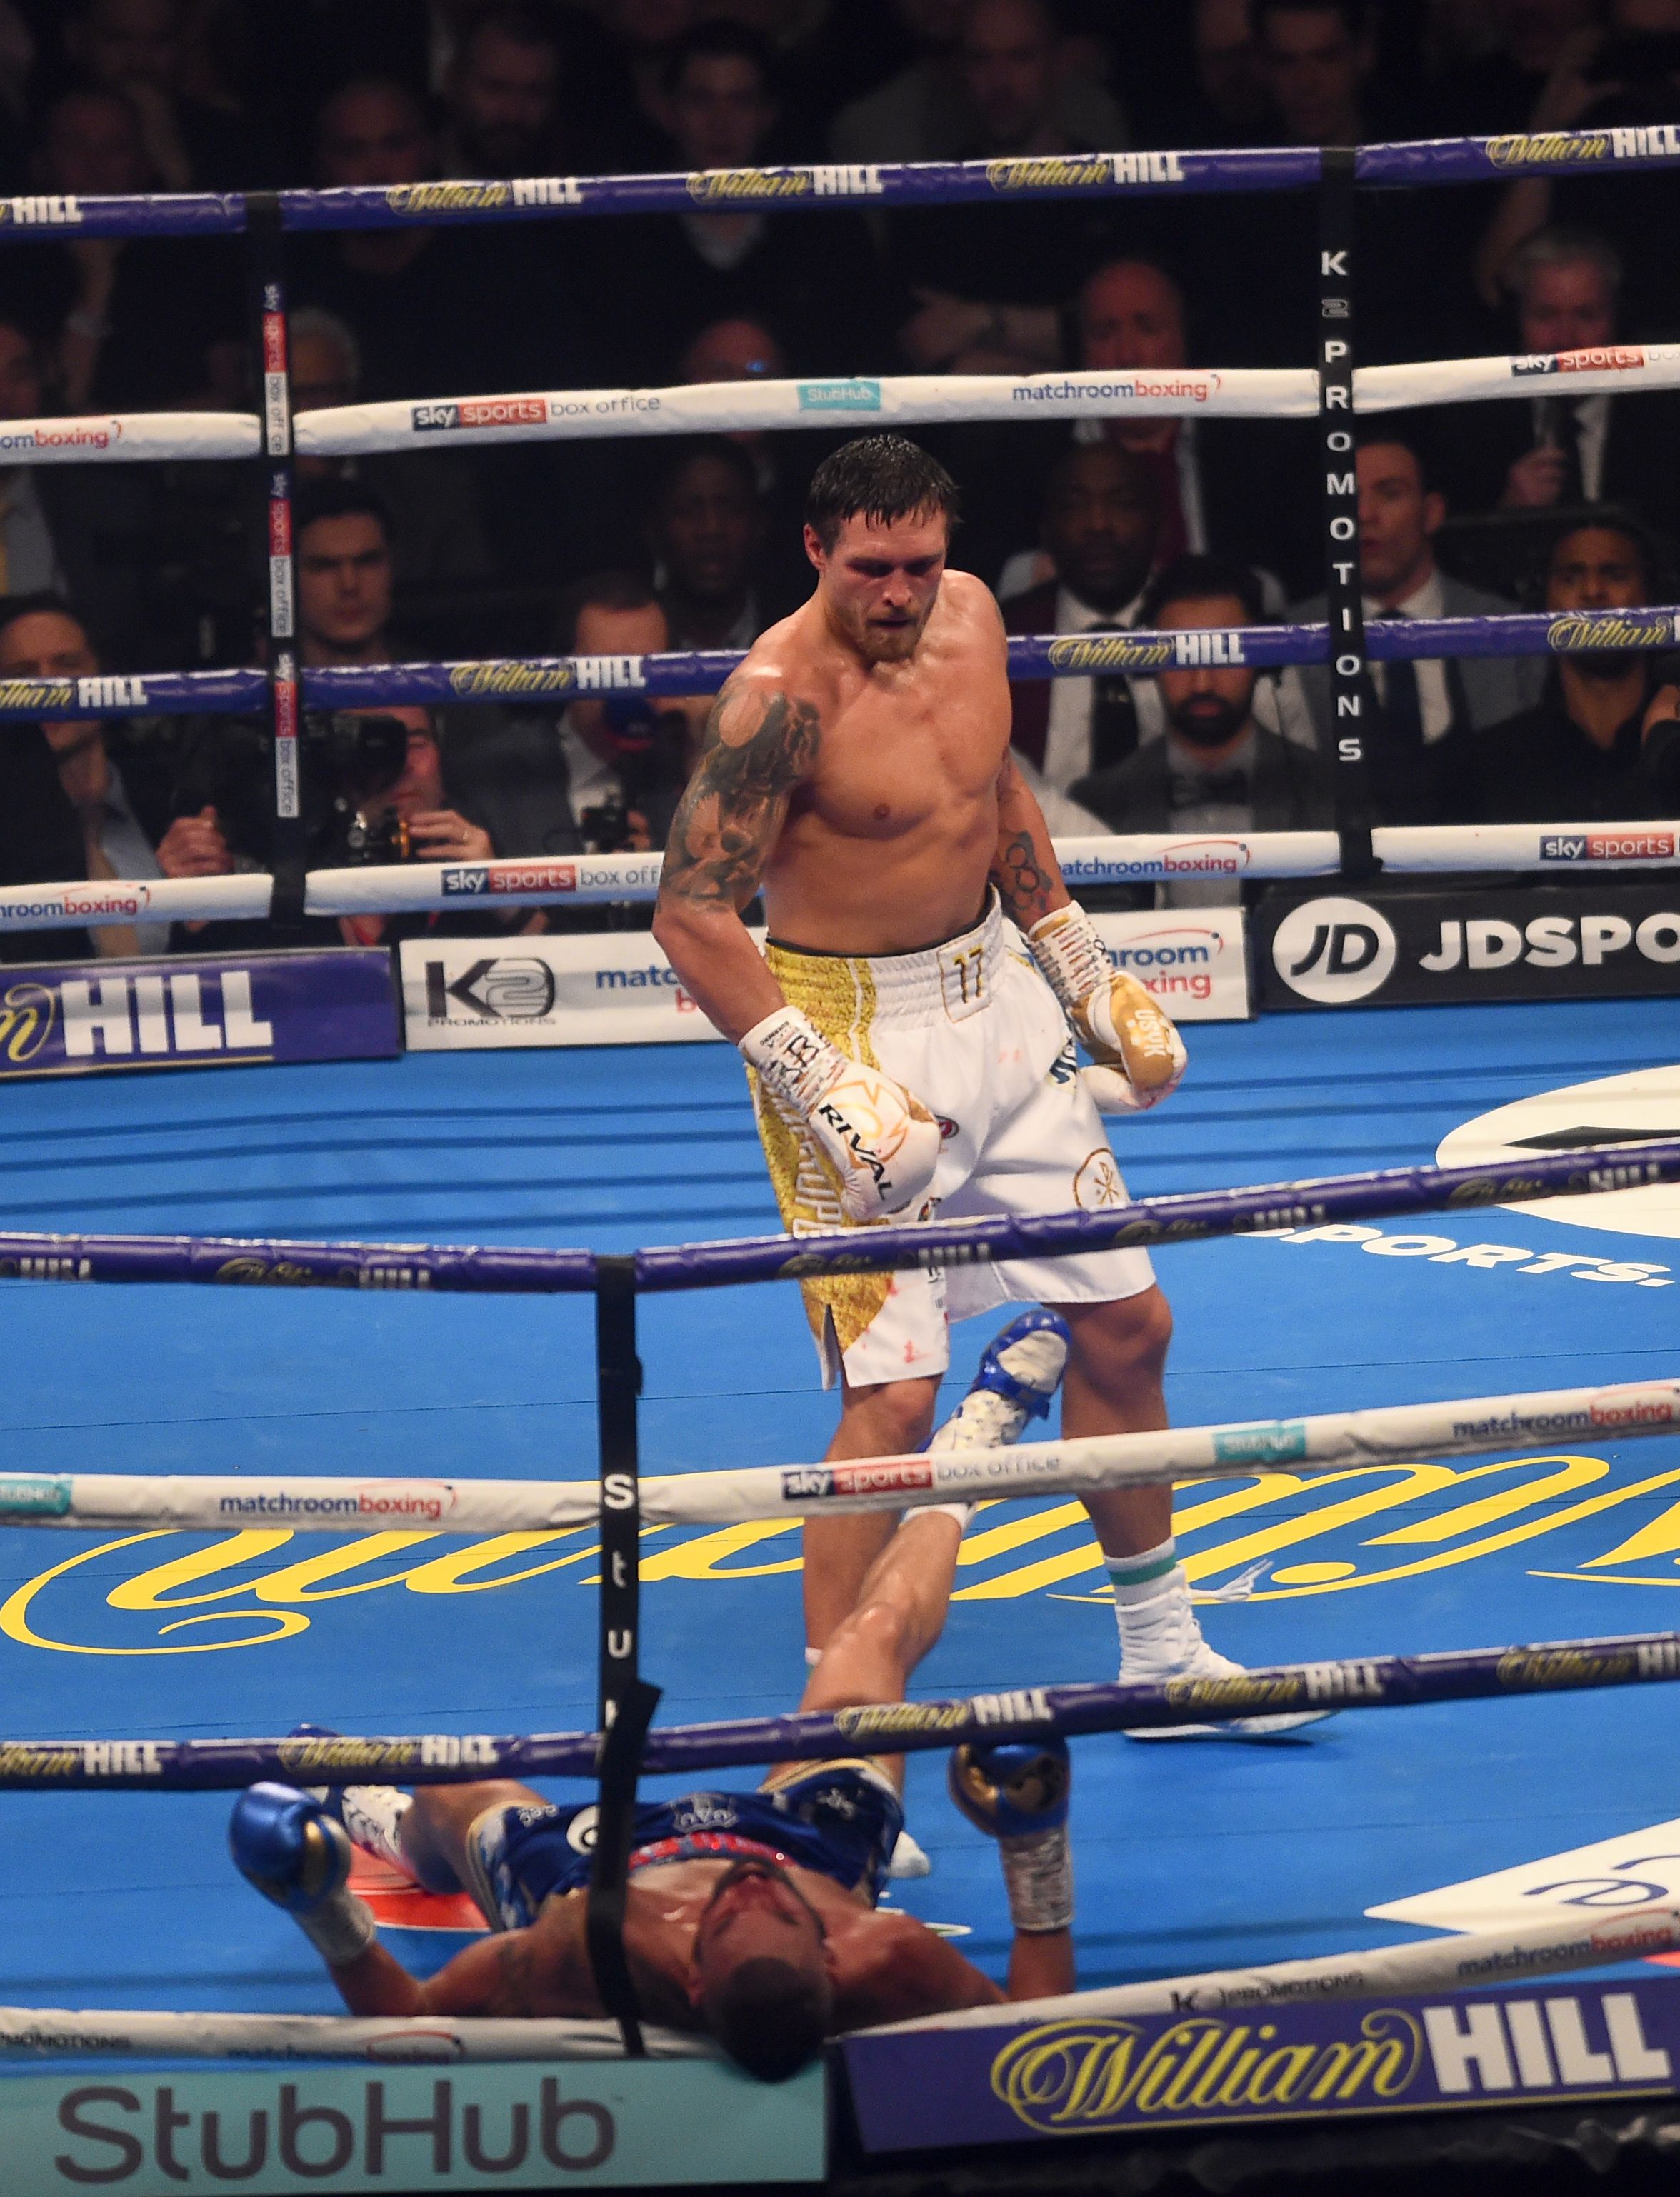 Tony bellew was knocked-out by Oleksandr Usyk